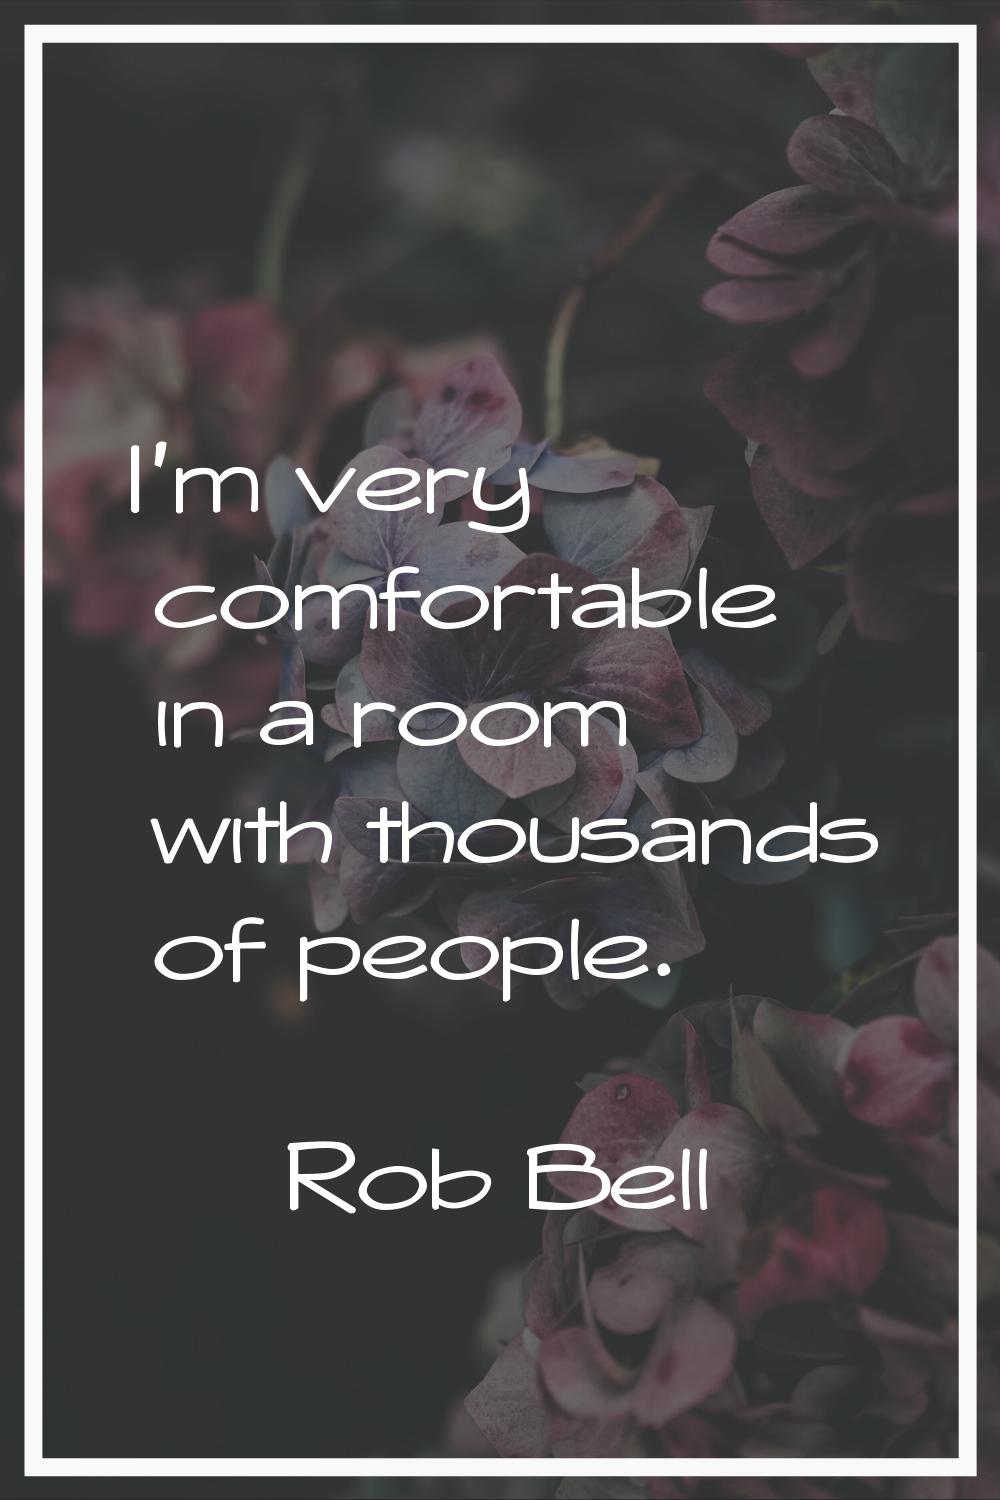 I'm very comfortable in a room with thousands of people.